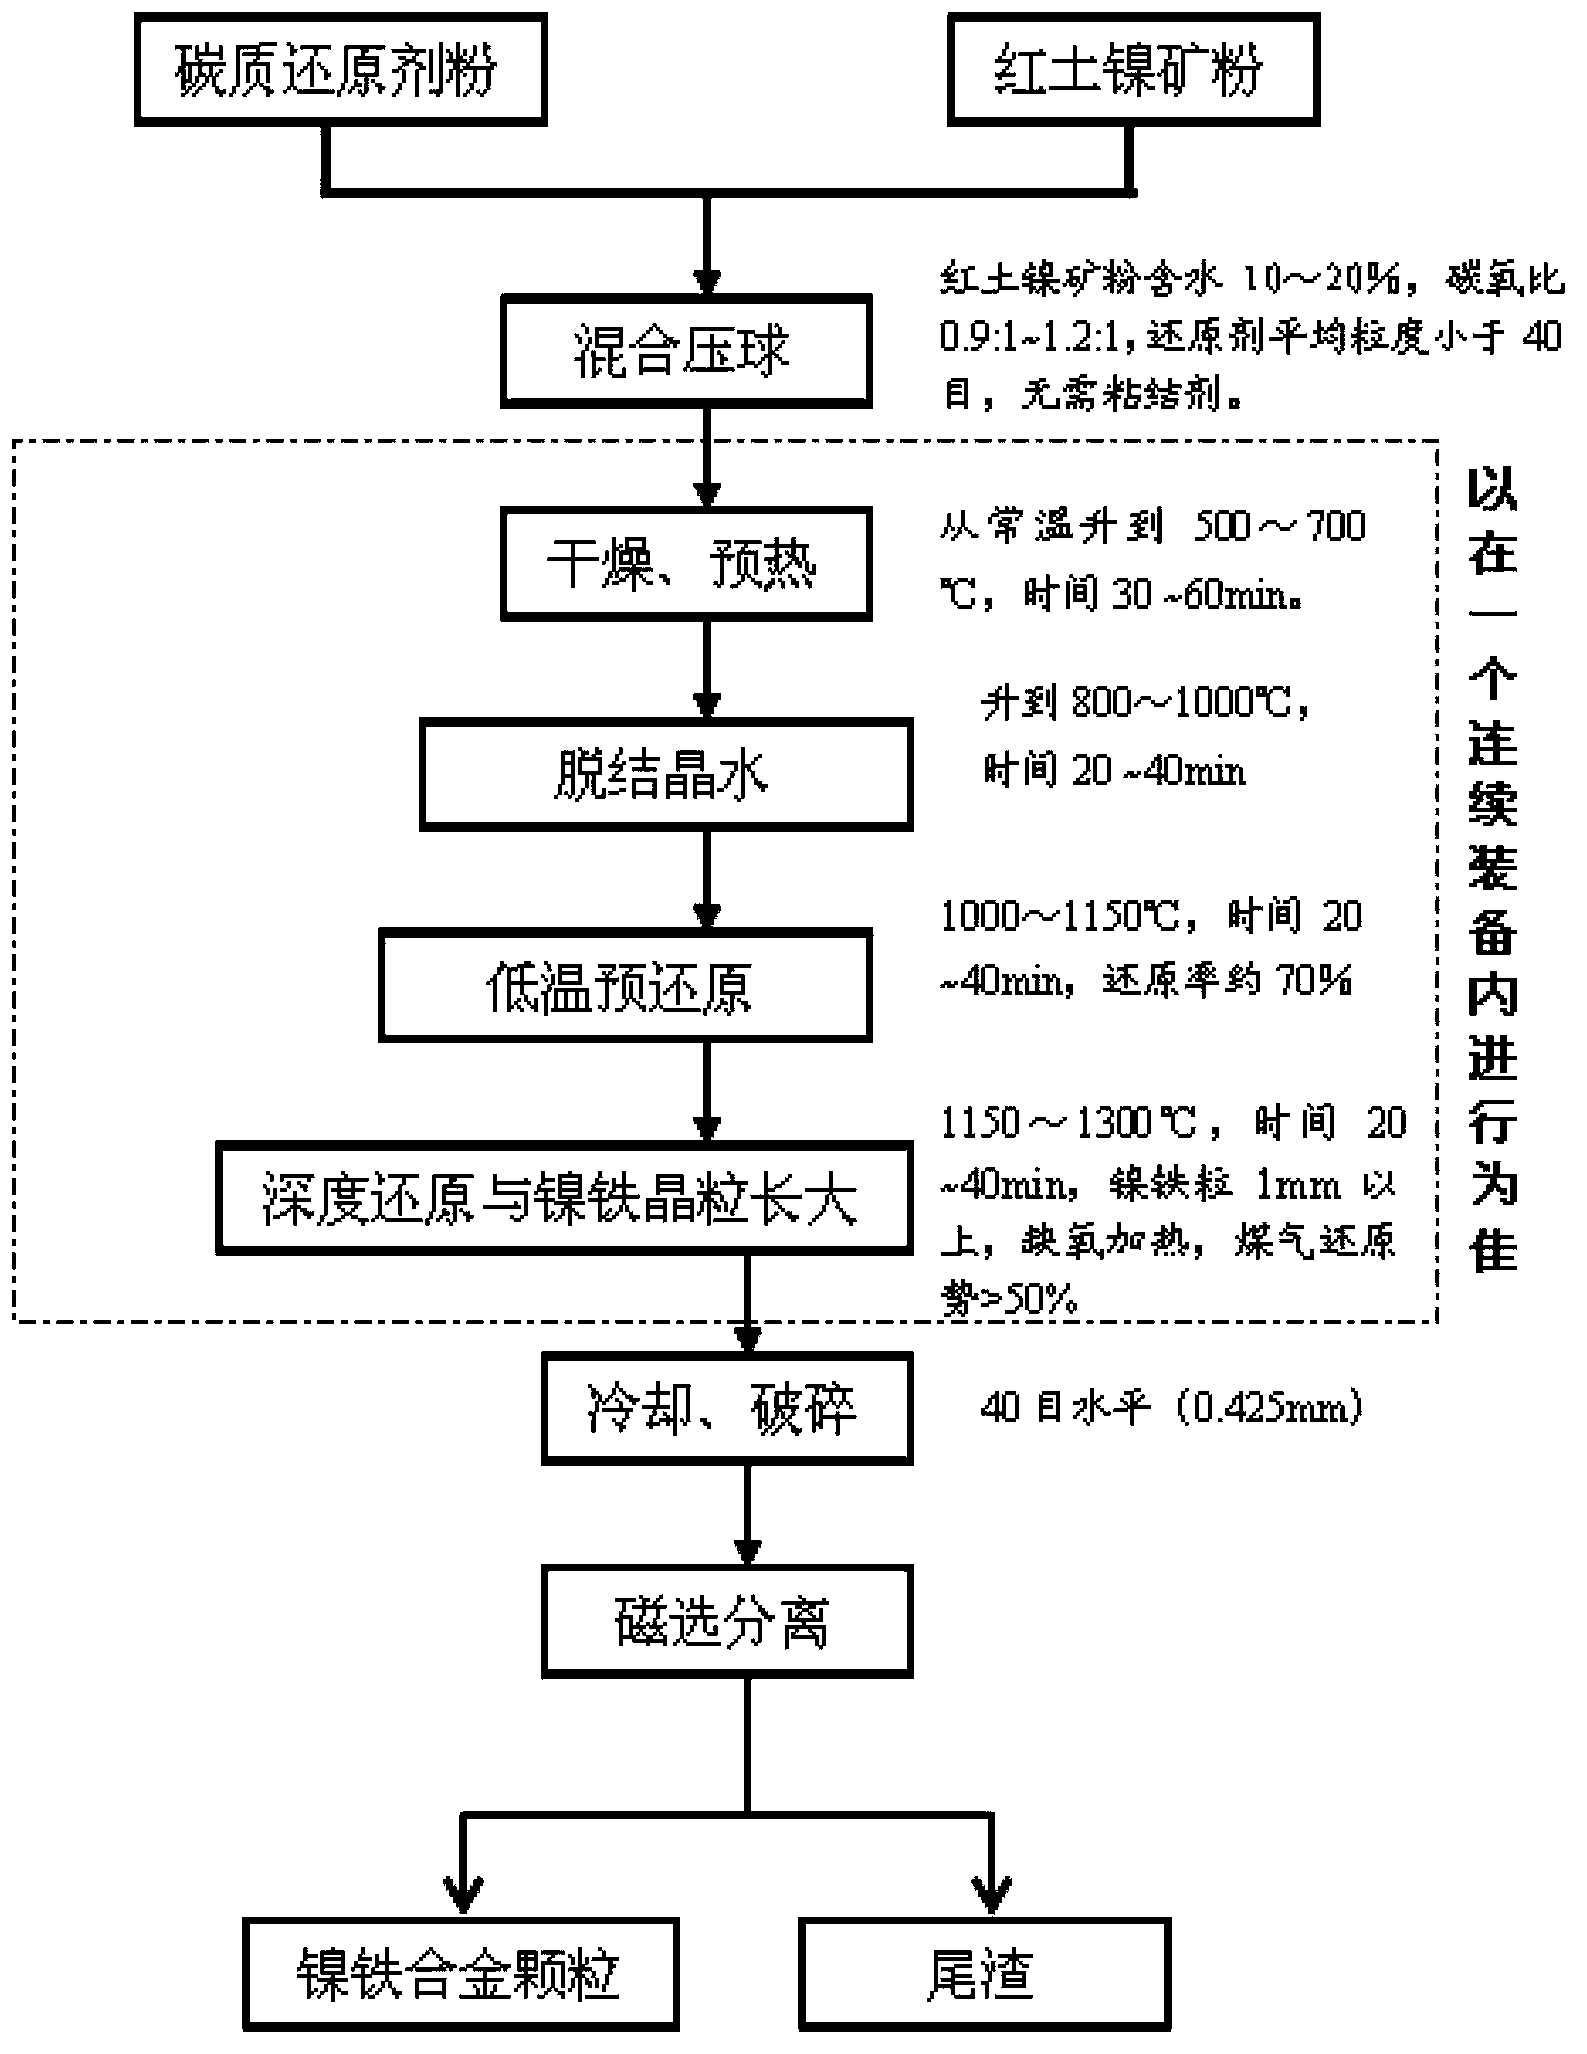 Method for producing nickel-iron alloy by smelting red earth nickel mineral at low temperature